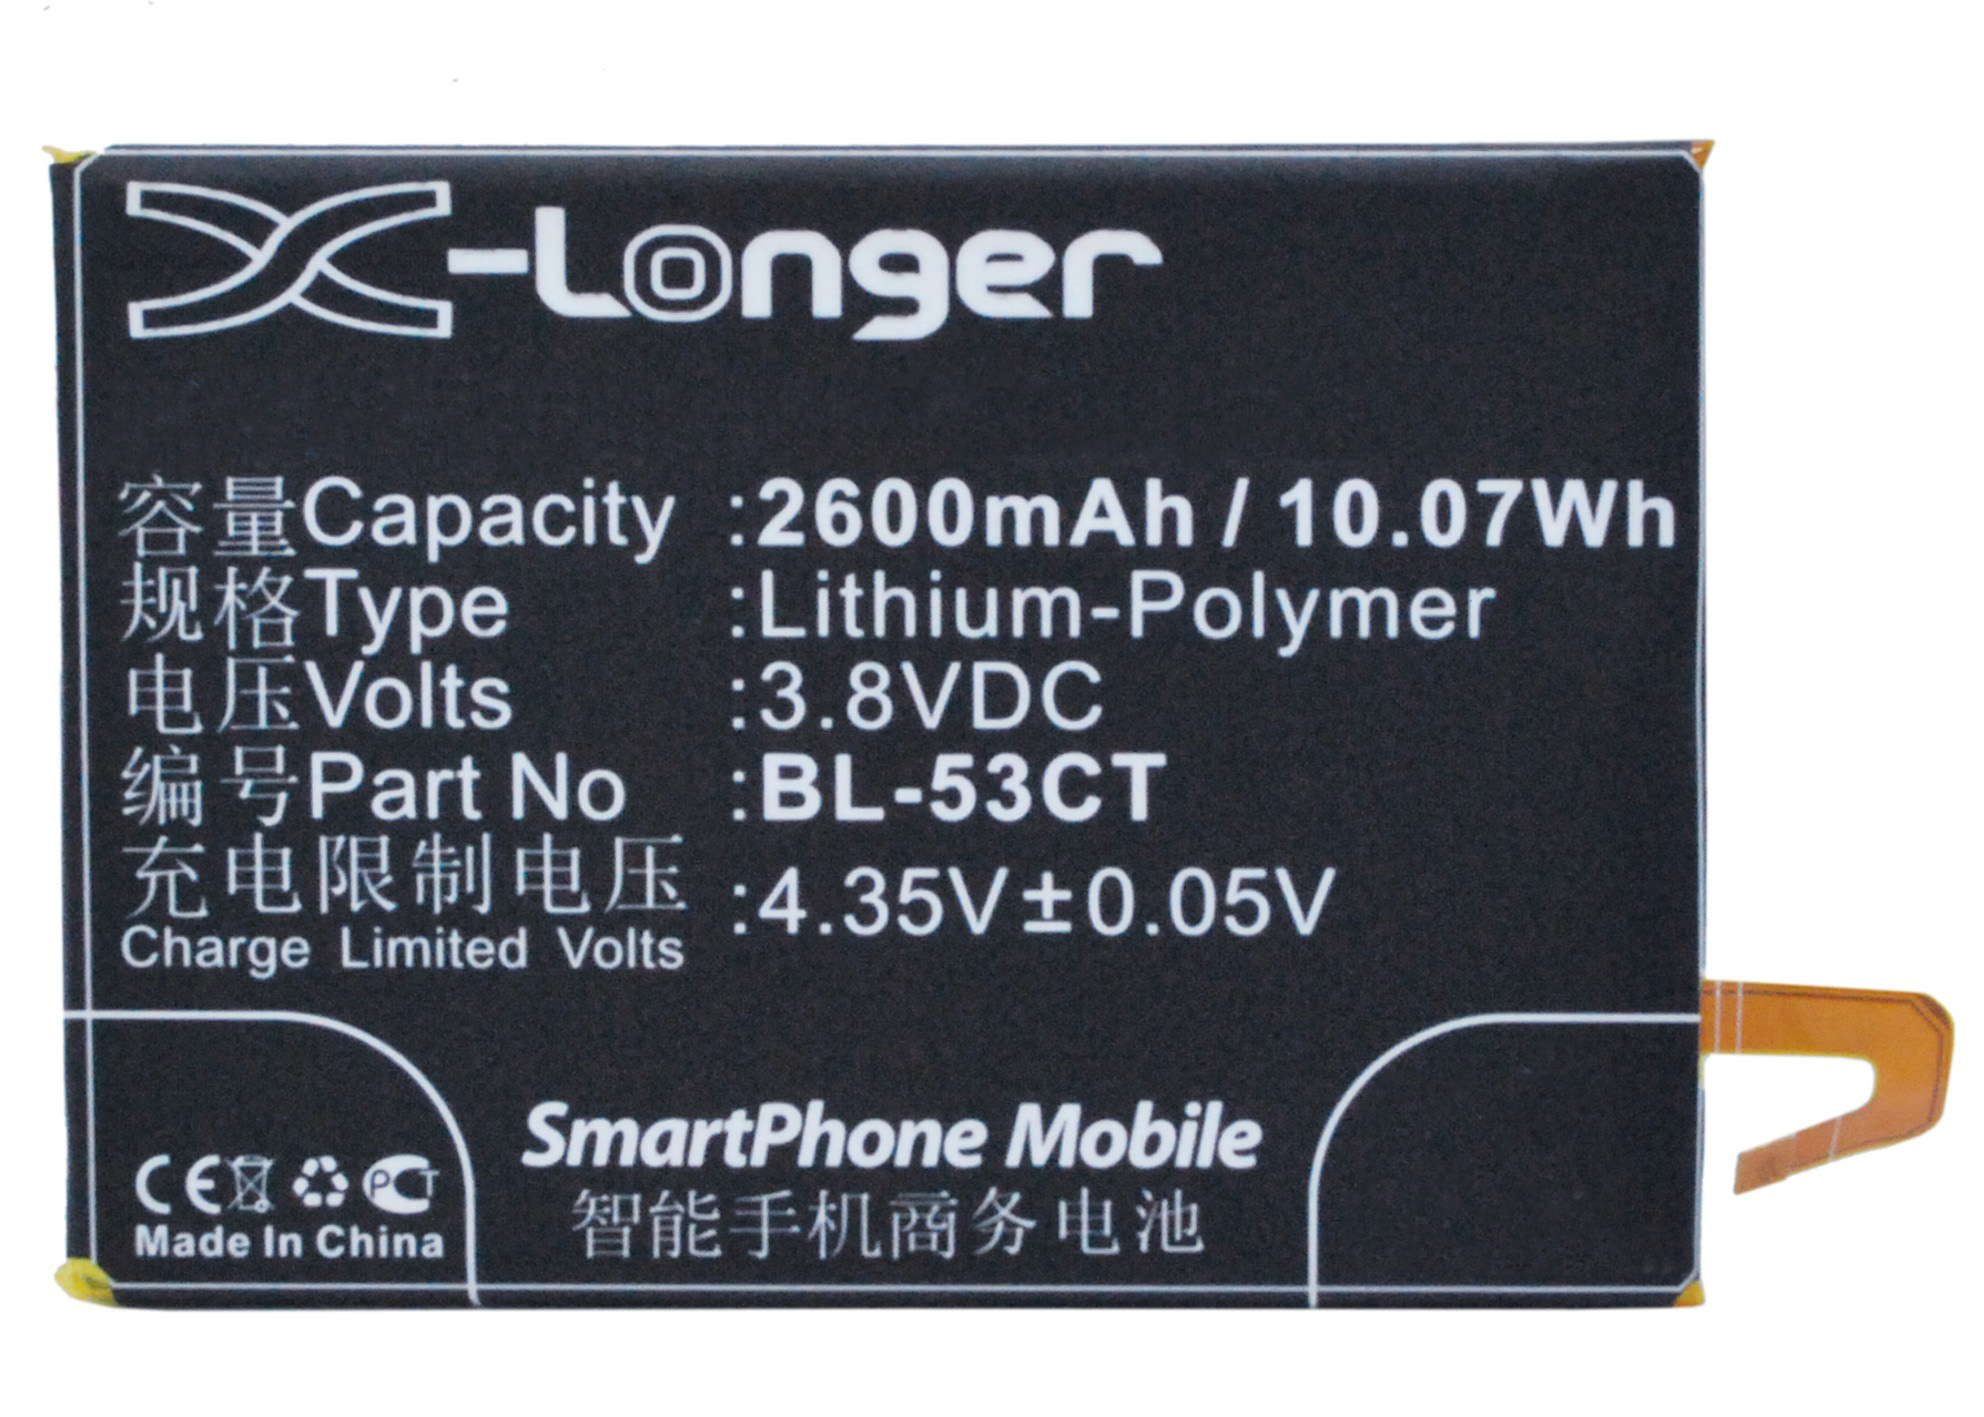 Synergy Digital Battery Compatible With KOOBEE BL-53CT Cellphone Battery - (Li-Pol, 3.8V, 2650 mAh / 10.07Wh)